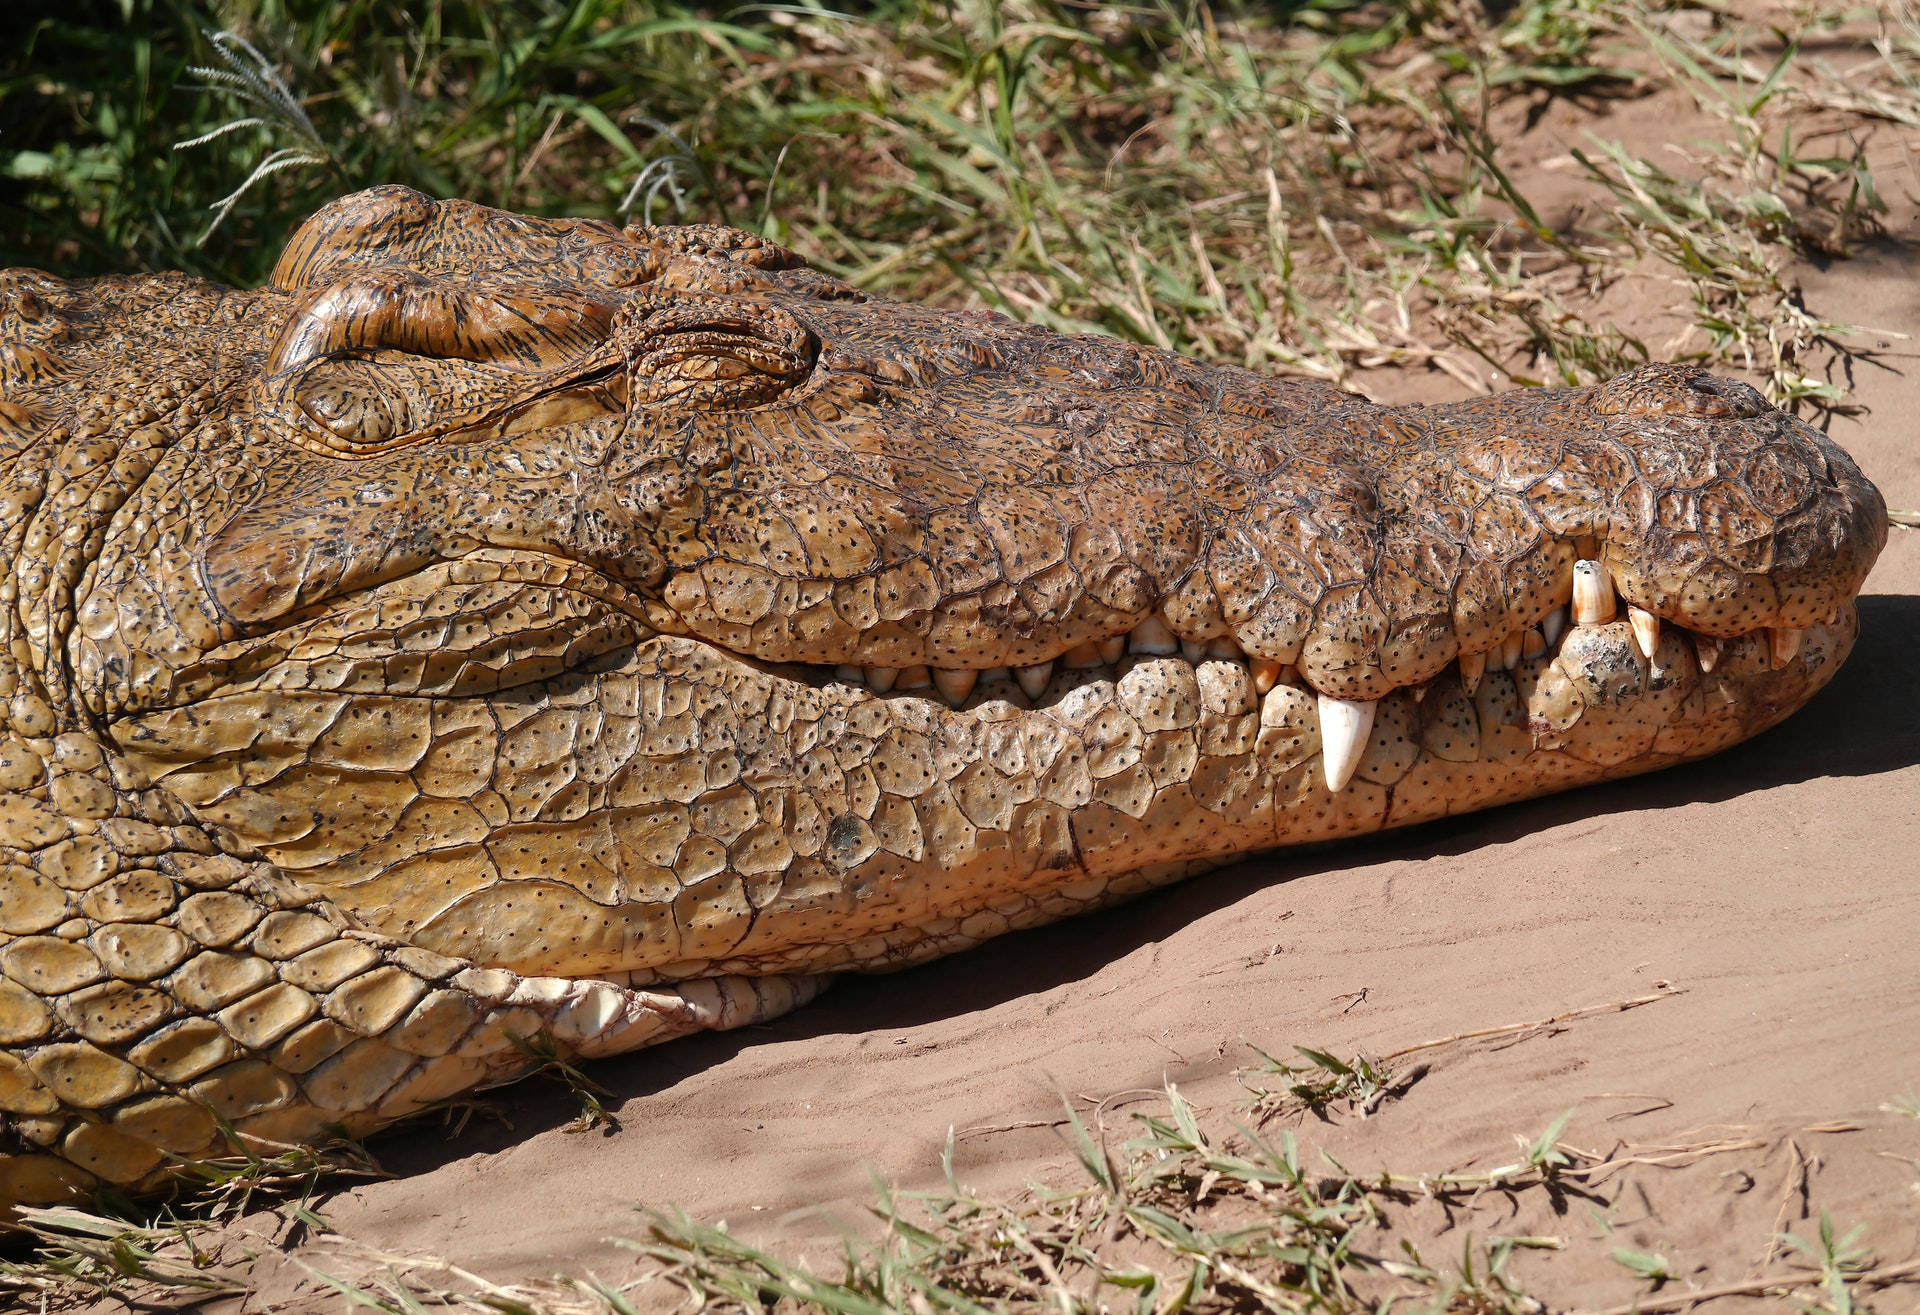 Mesmerizing Close-up Of A Smiling Brown Alligator